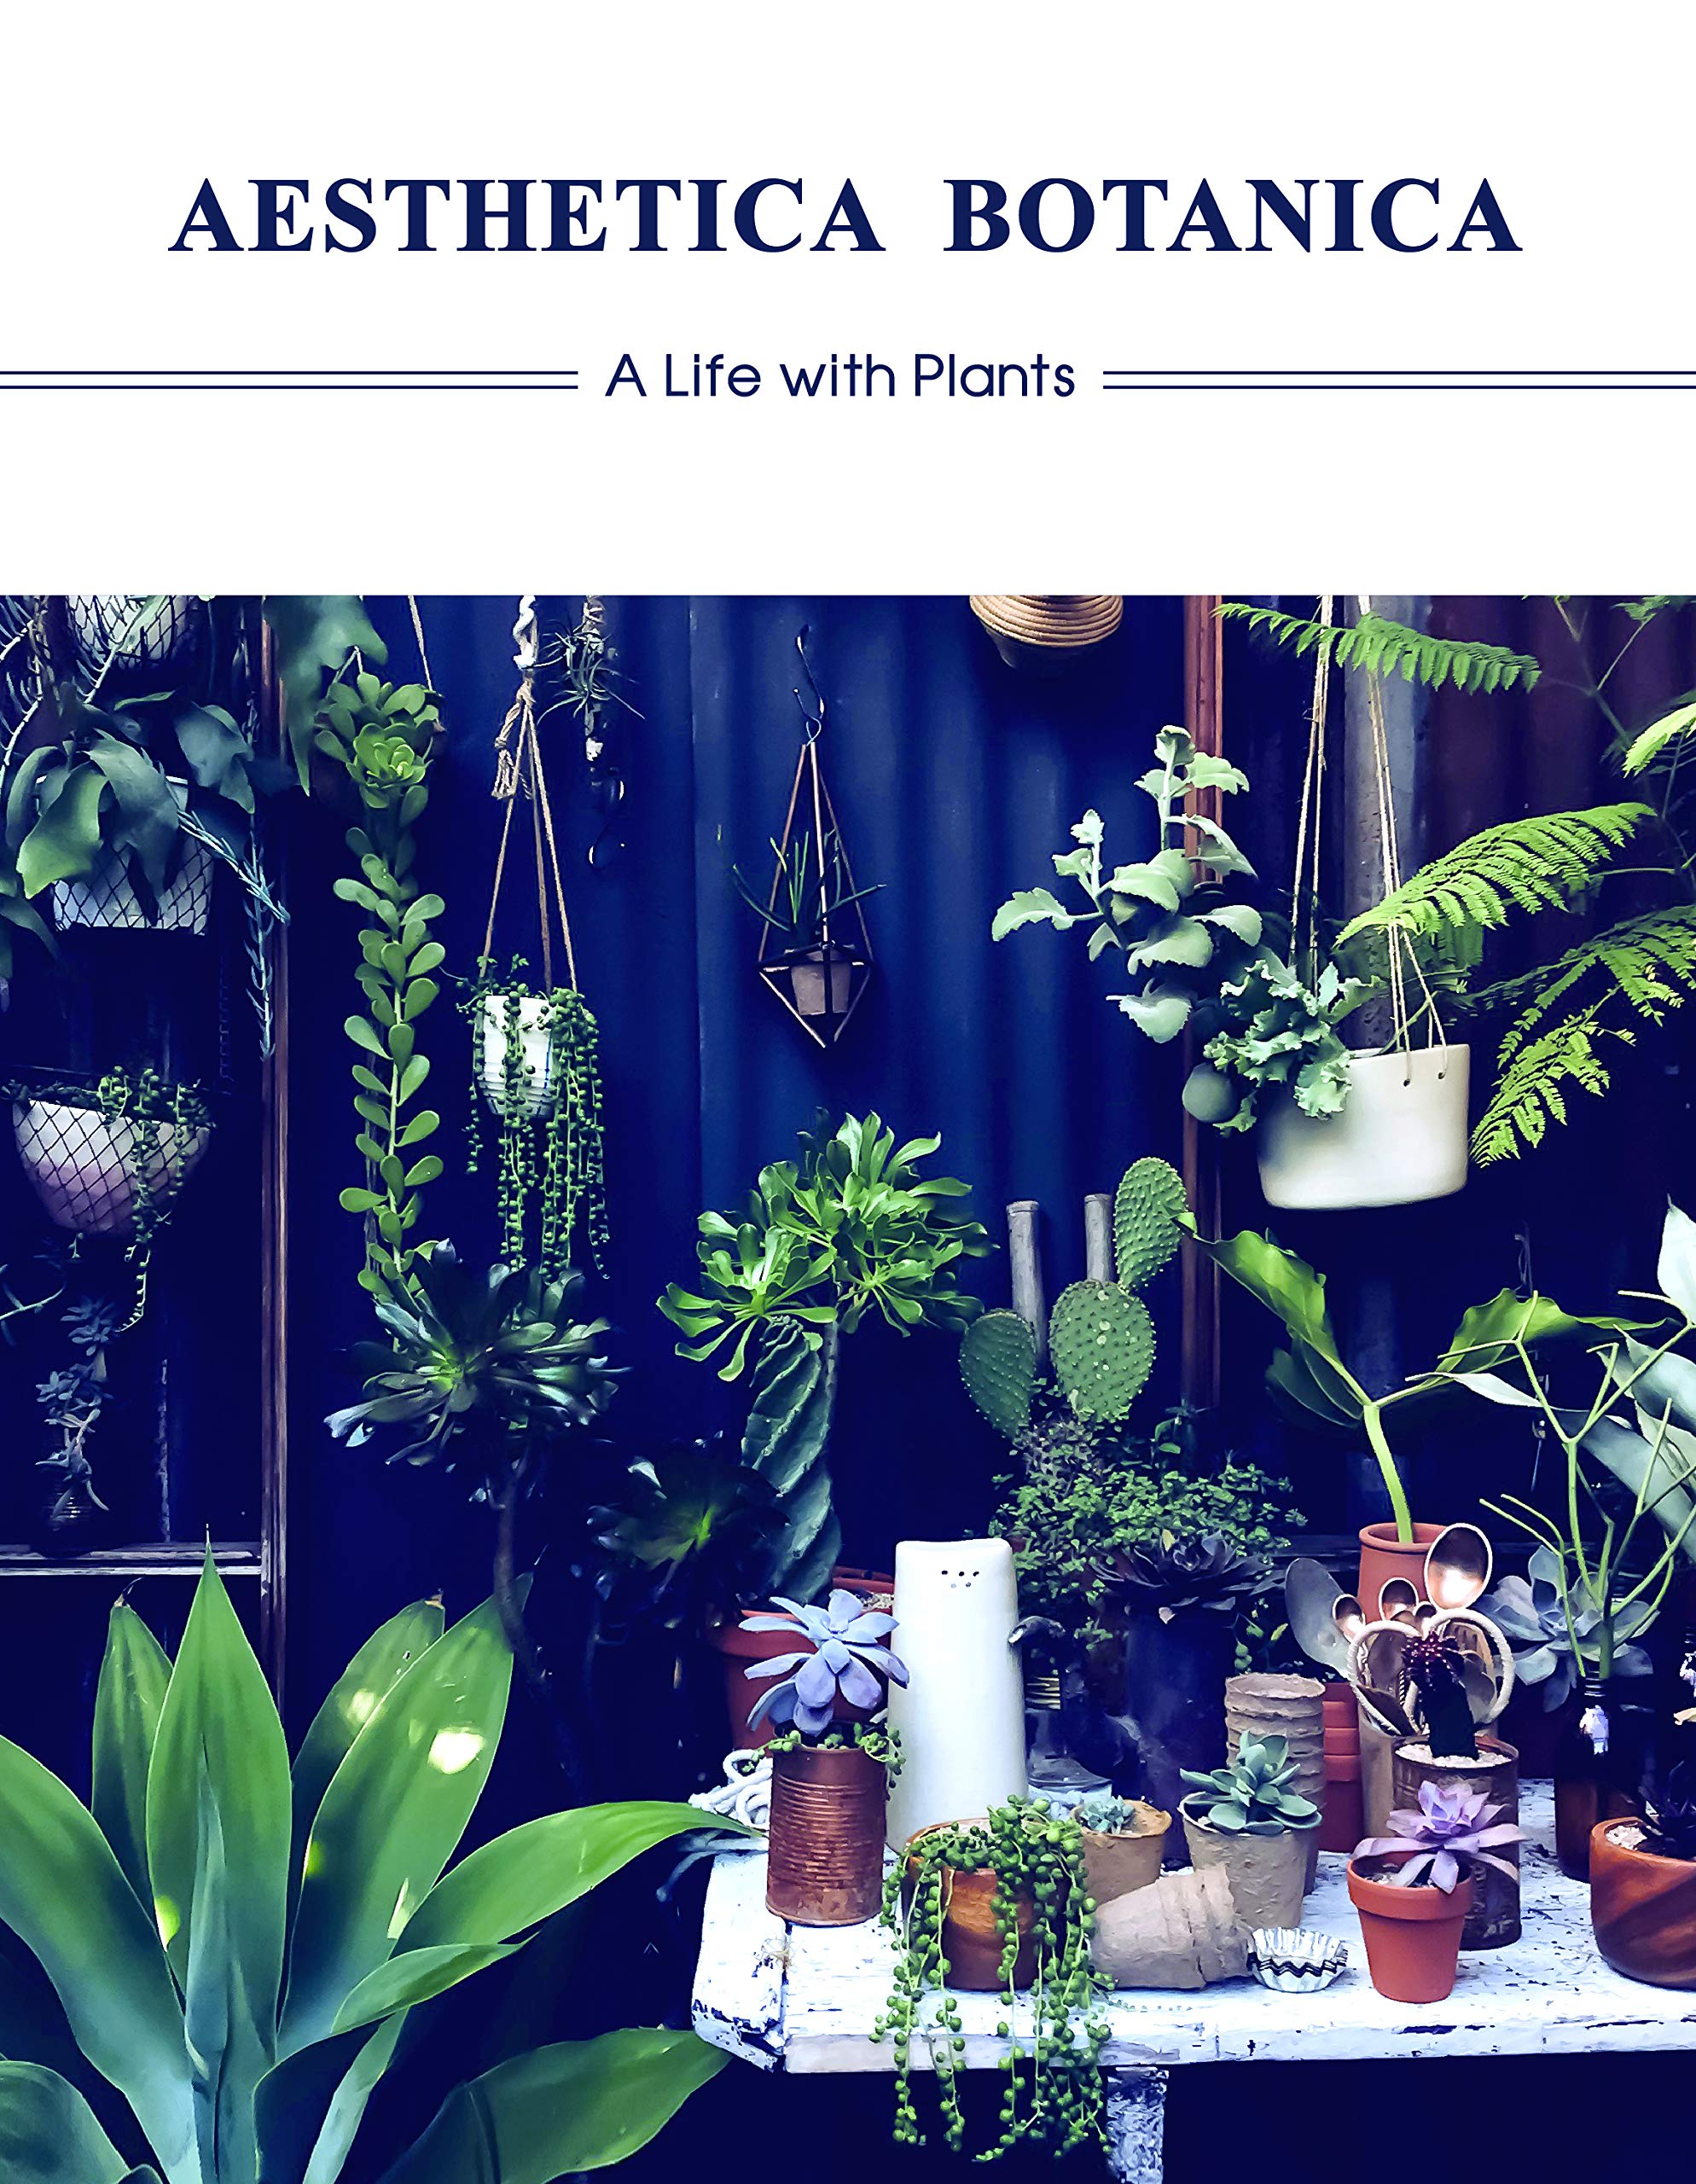 Aesthetica Botanica: A Life with Plants aesthetica botanica a life with plants